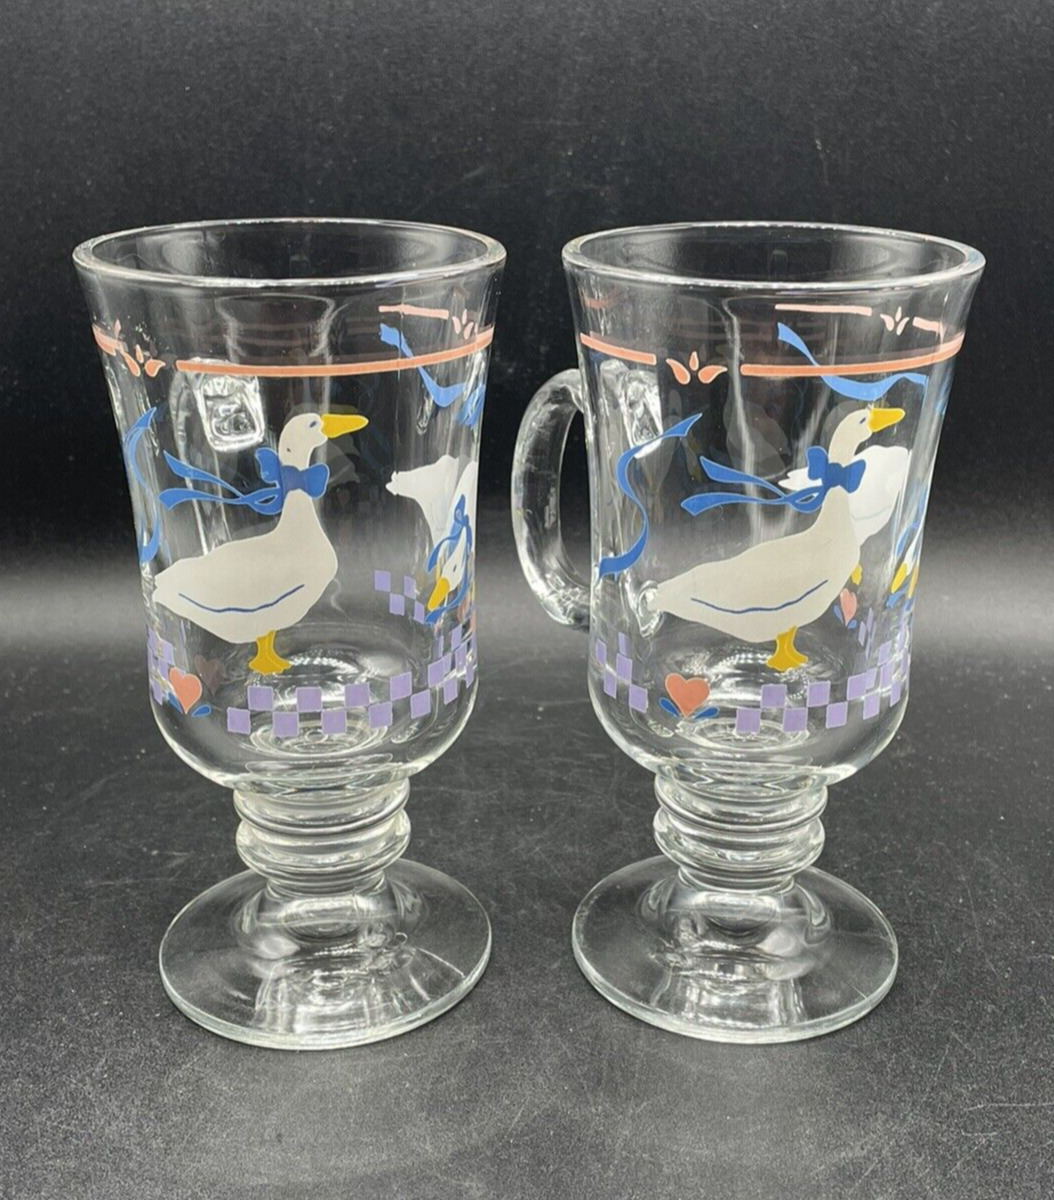 Latte Irish Coffee Cups/Mugs Libbey Geese Blue Ribbon Set of 2 Footed Vintage